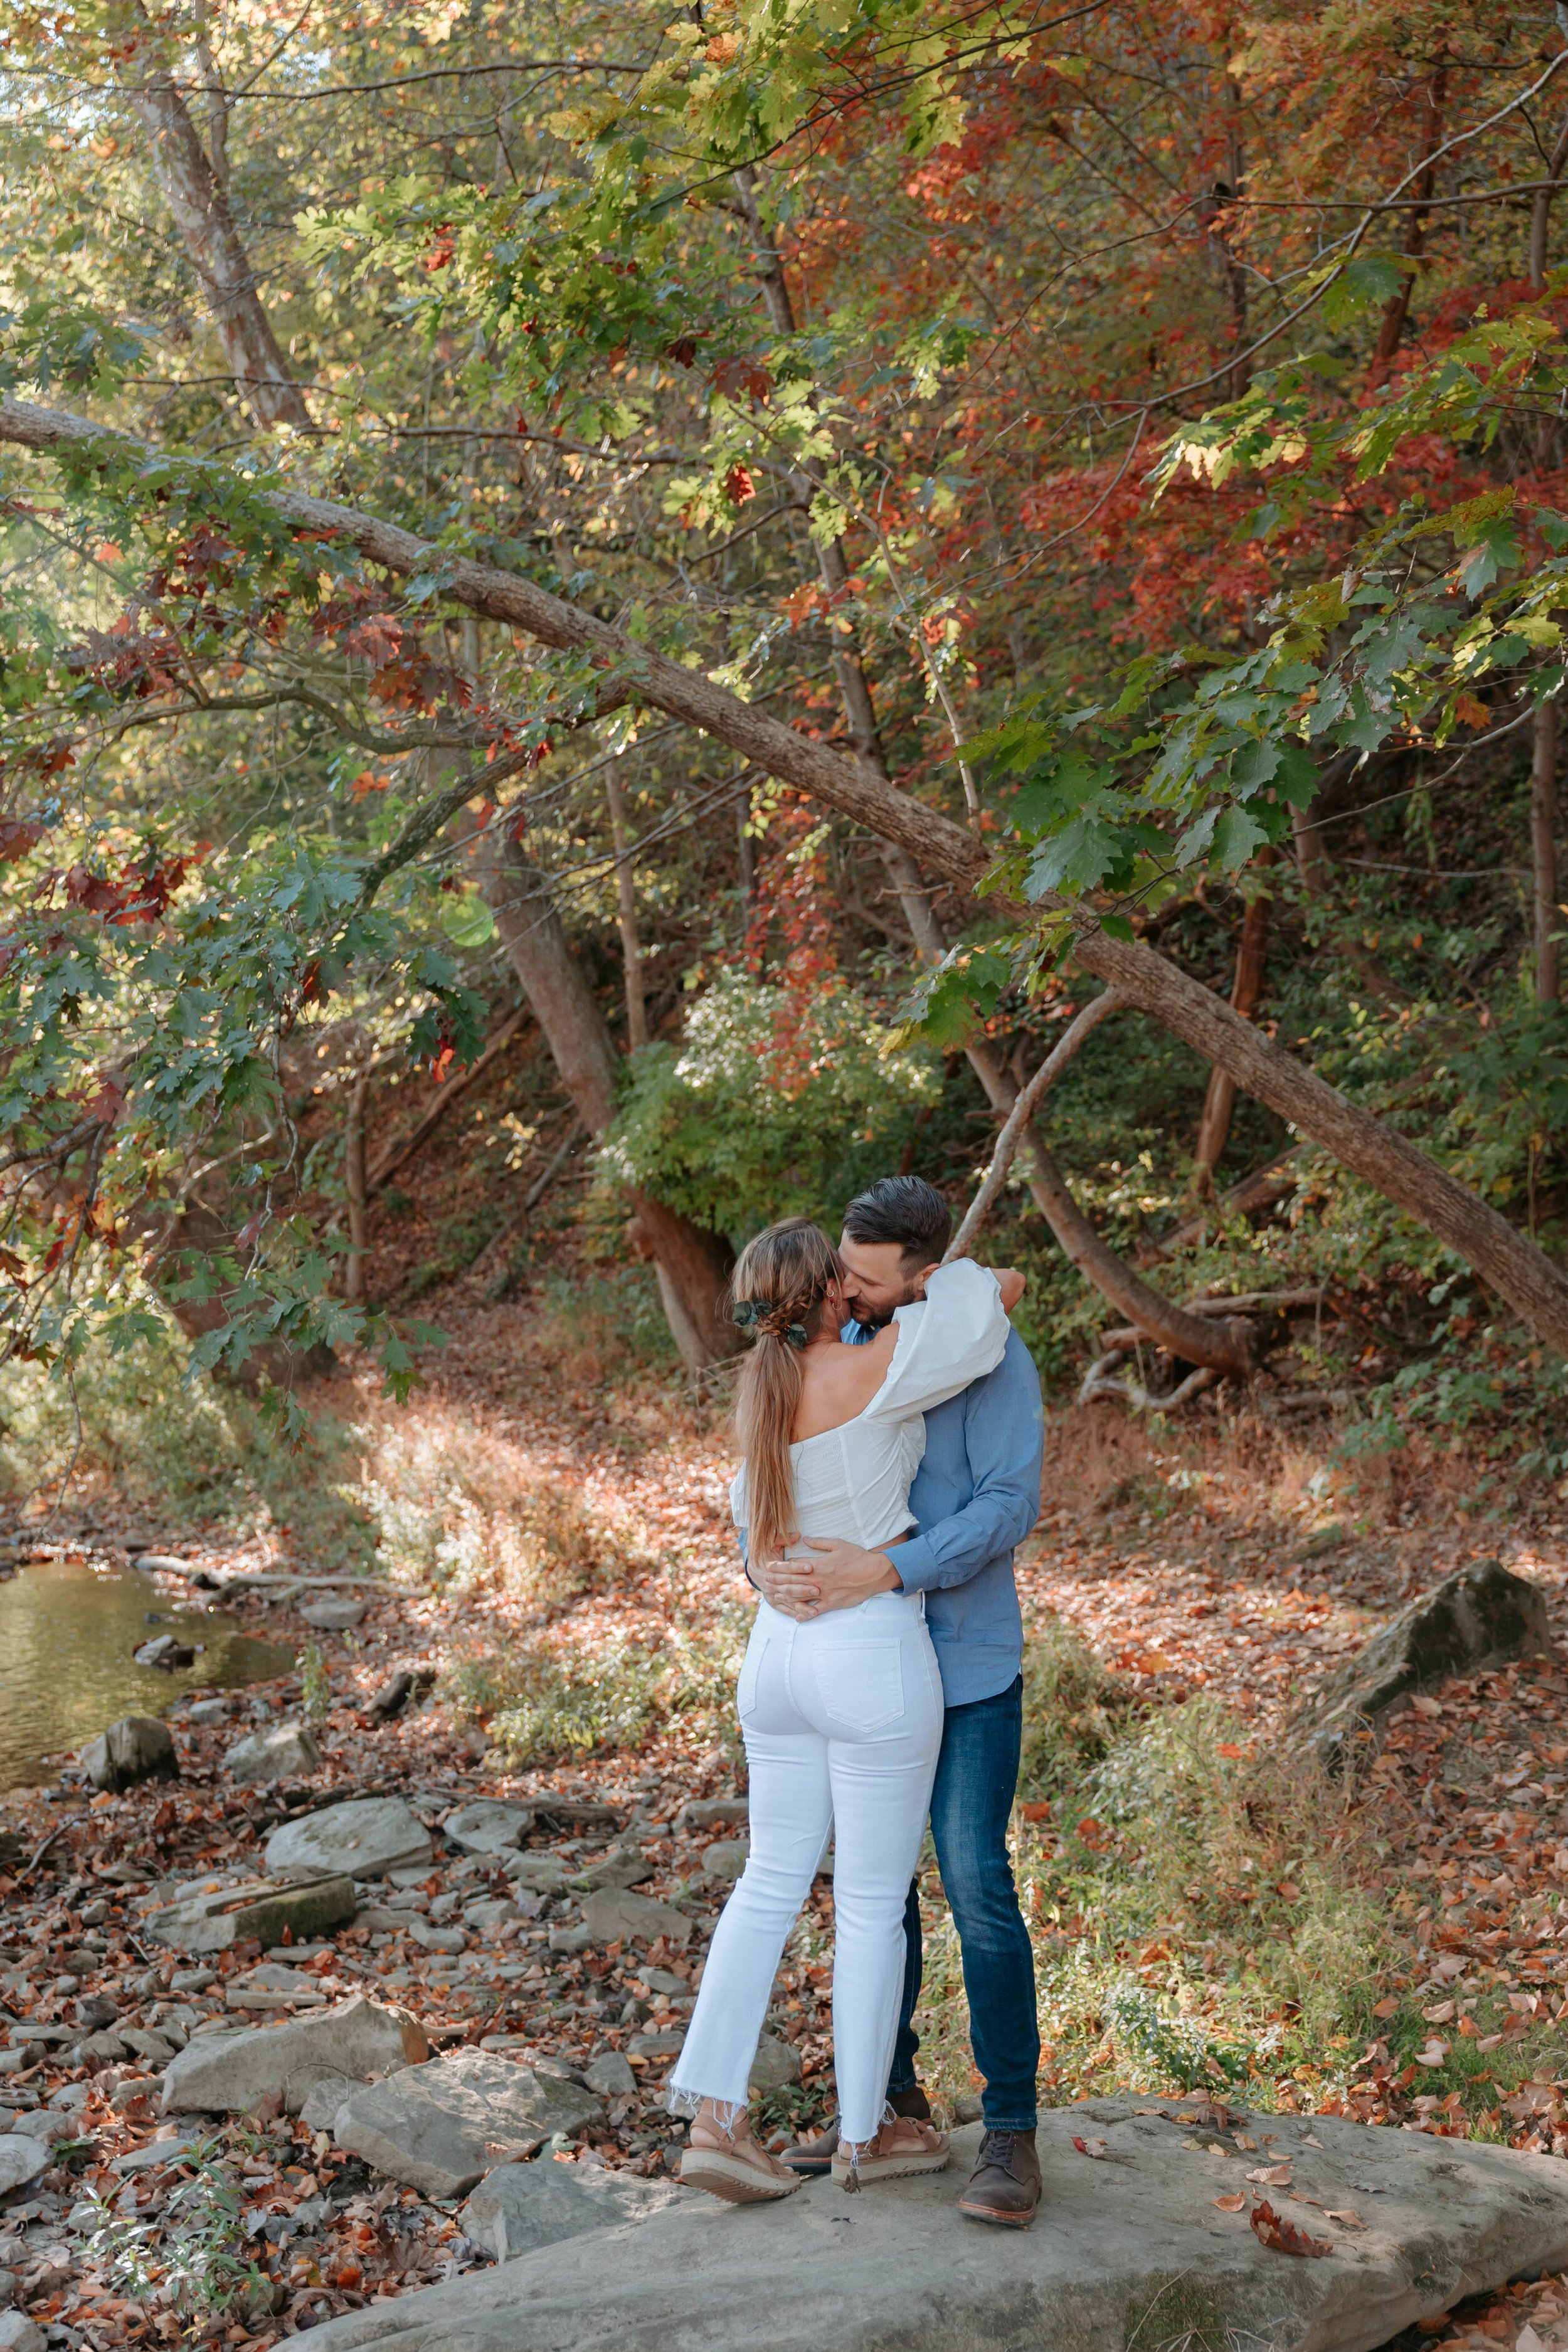 Man hugs woman while standing on large rock.